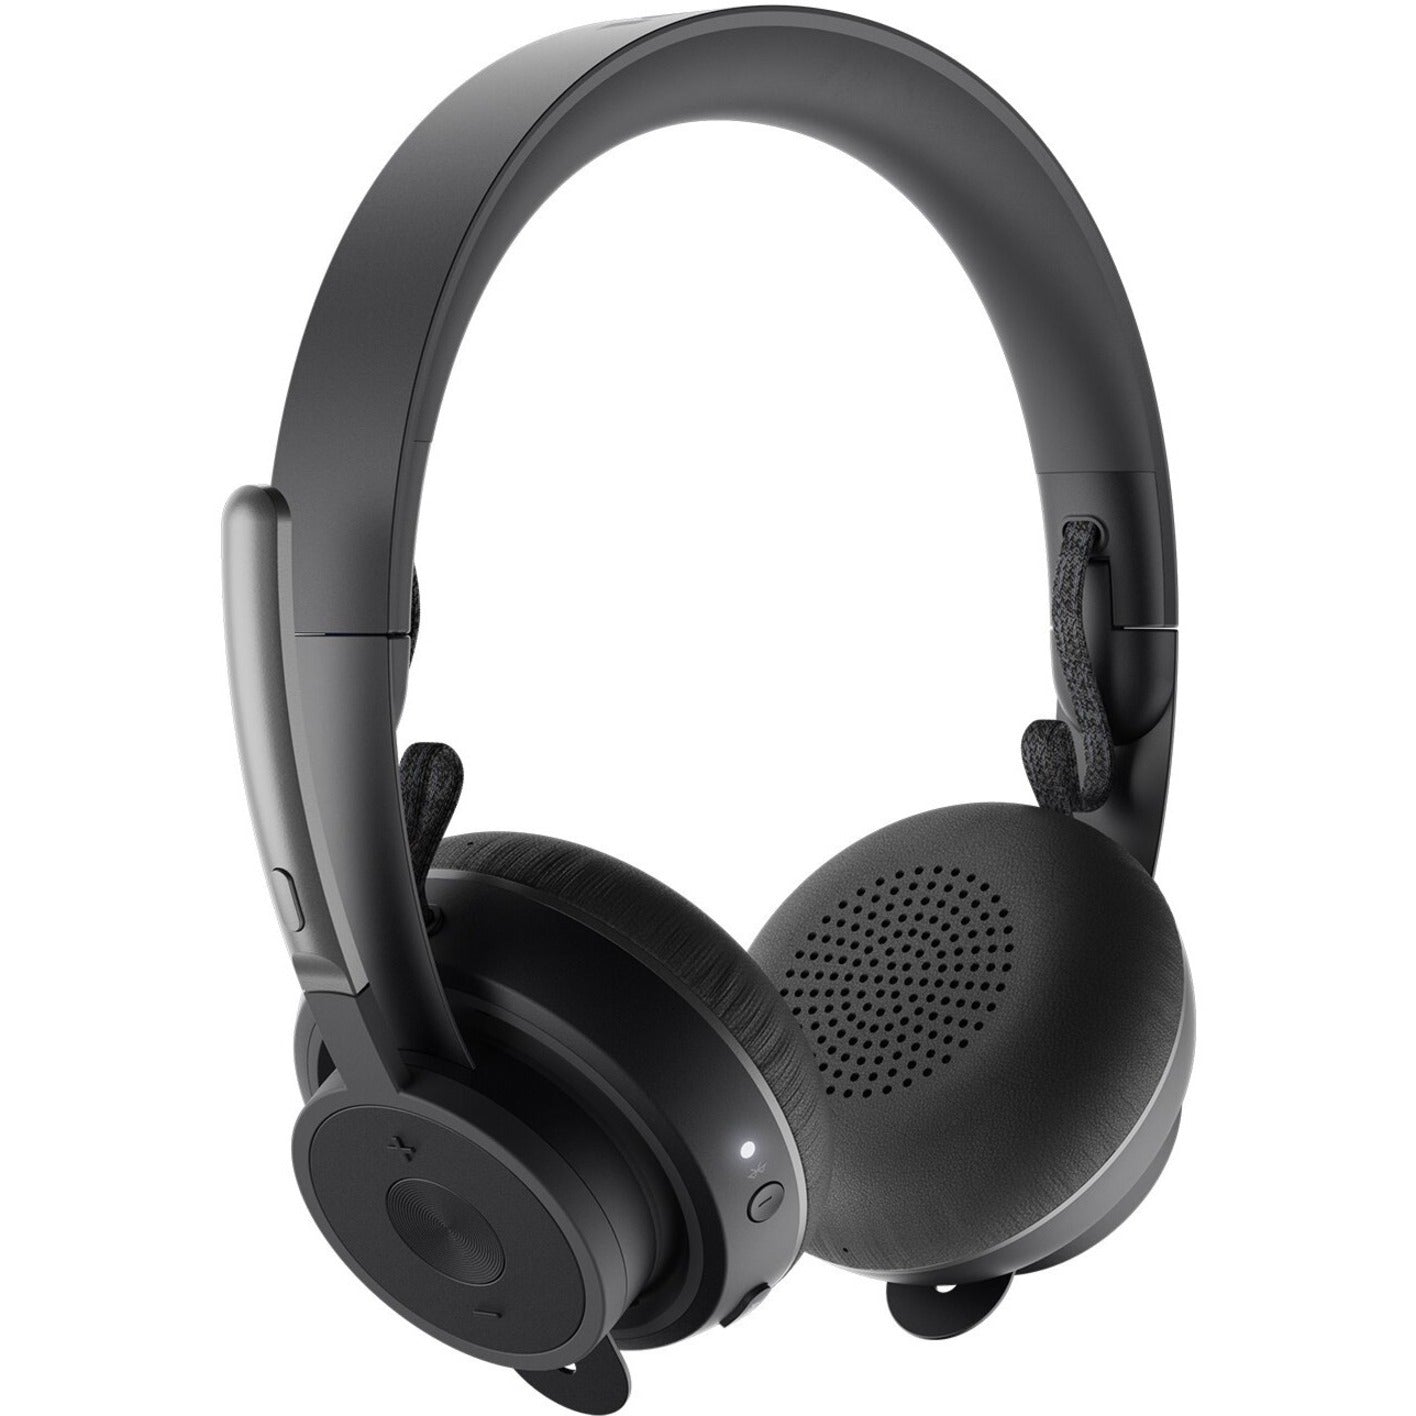 Logitech 981-000913 Zone Wireless Plus Headset, Noise Cancelling, Bluetooth Connectivity